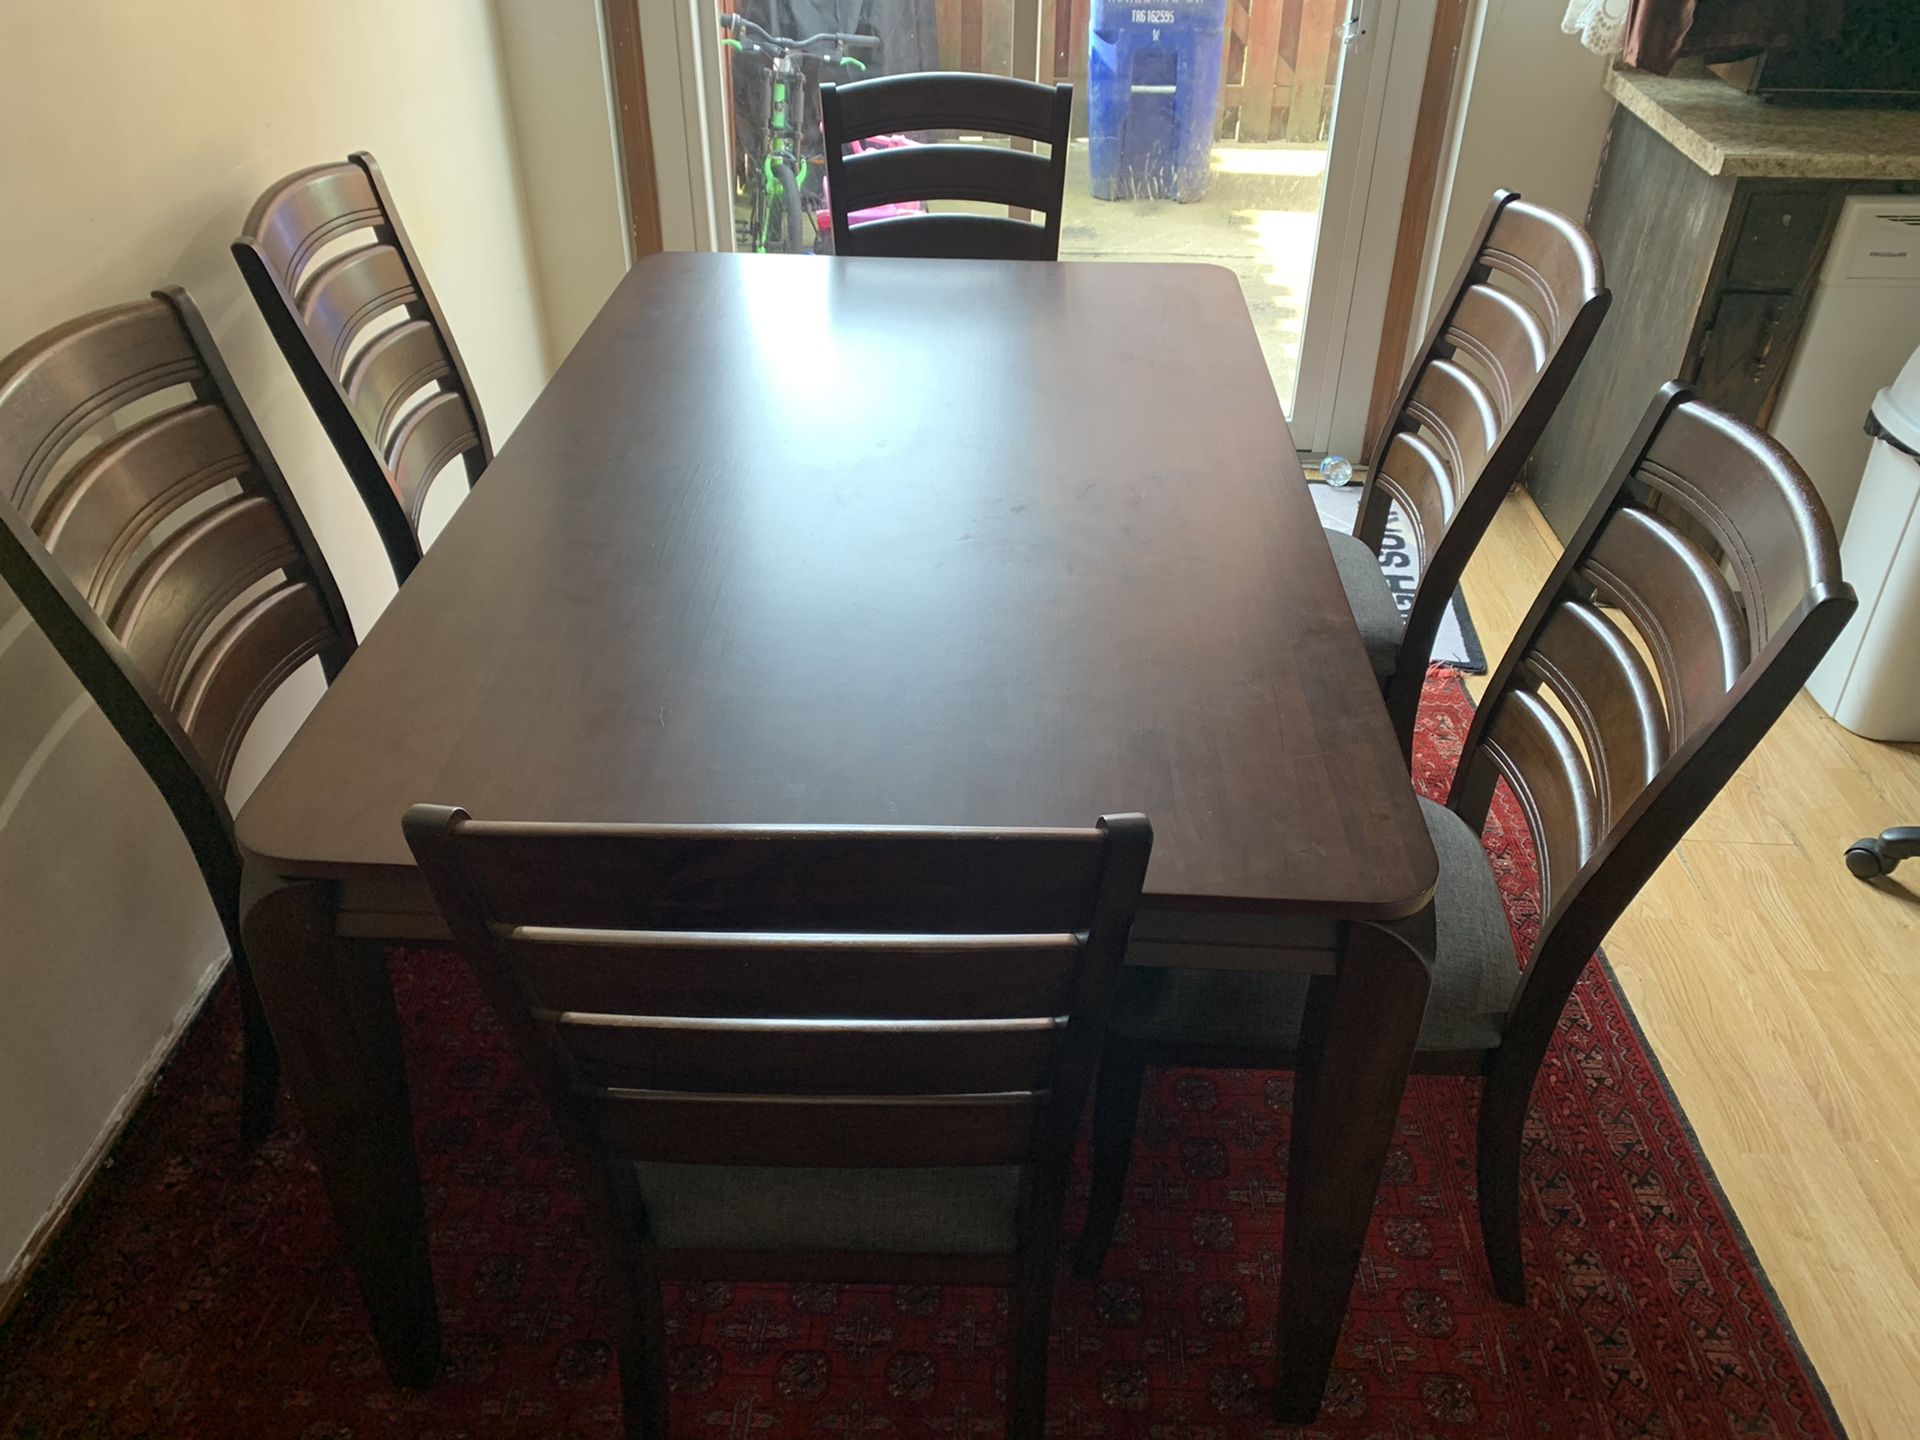 Dining table and 6 chairs